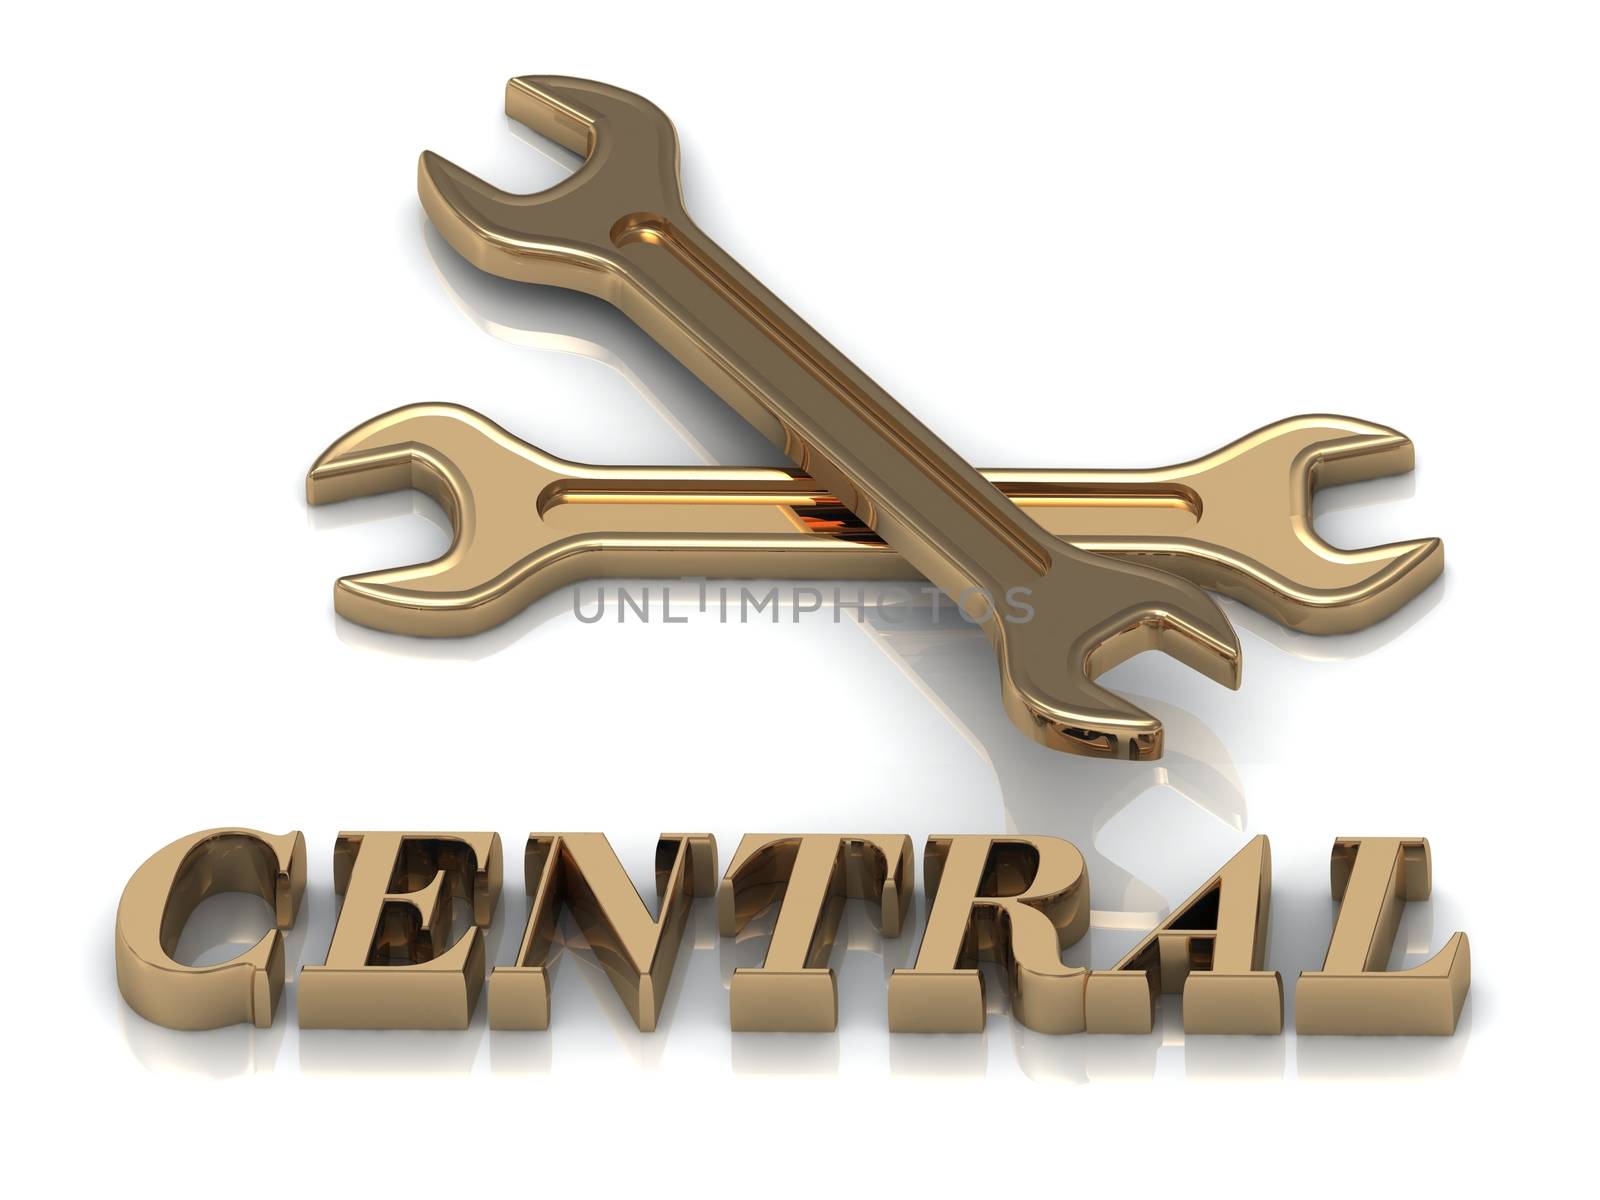 CENTRAL- inscription of metal letters and 2 keys on white background